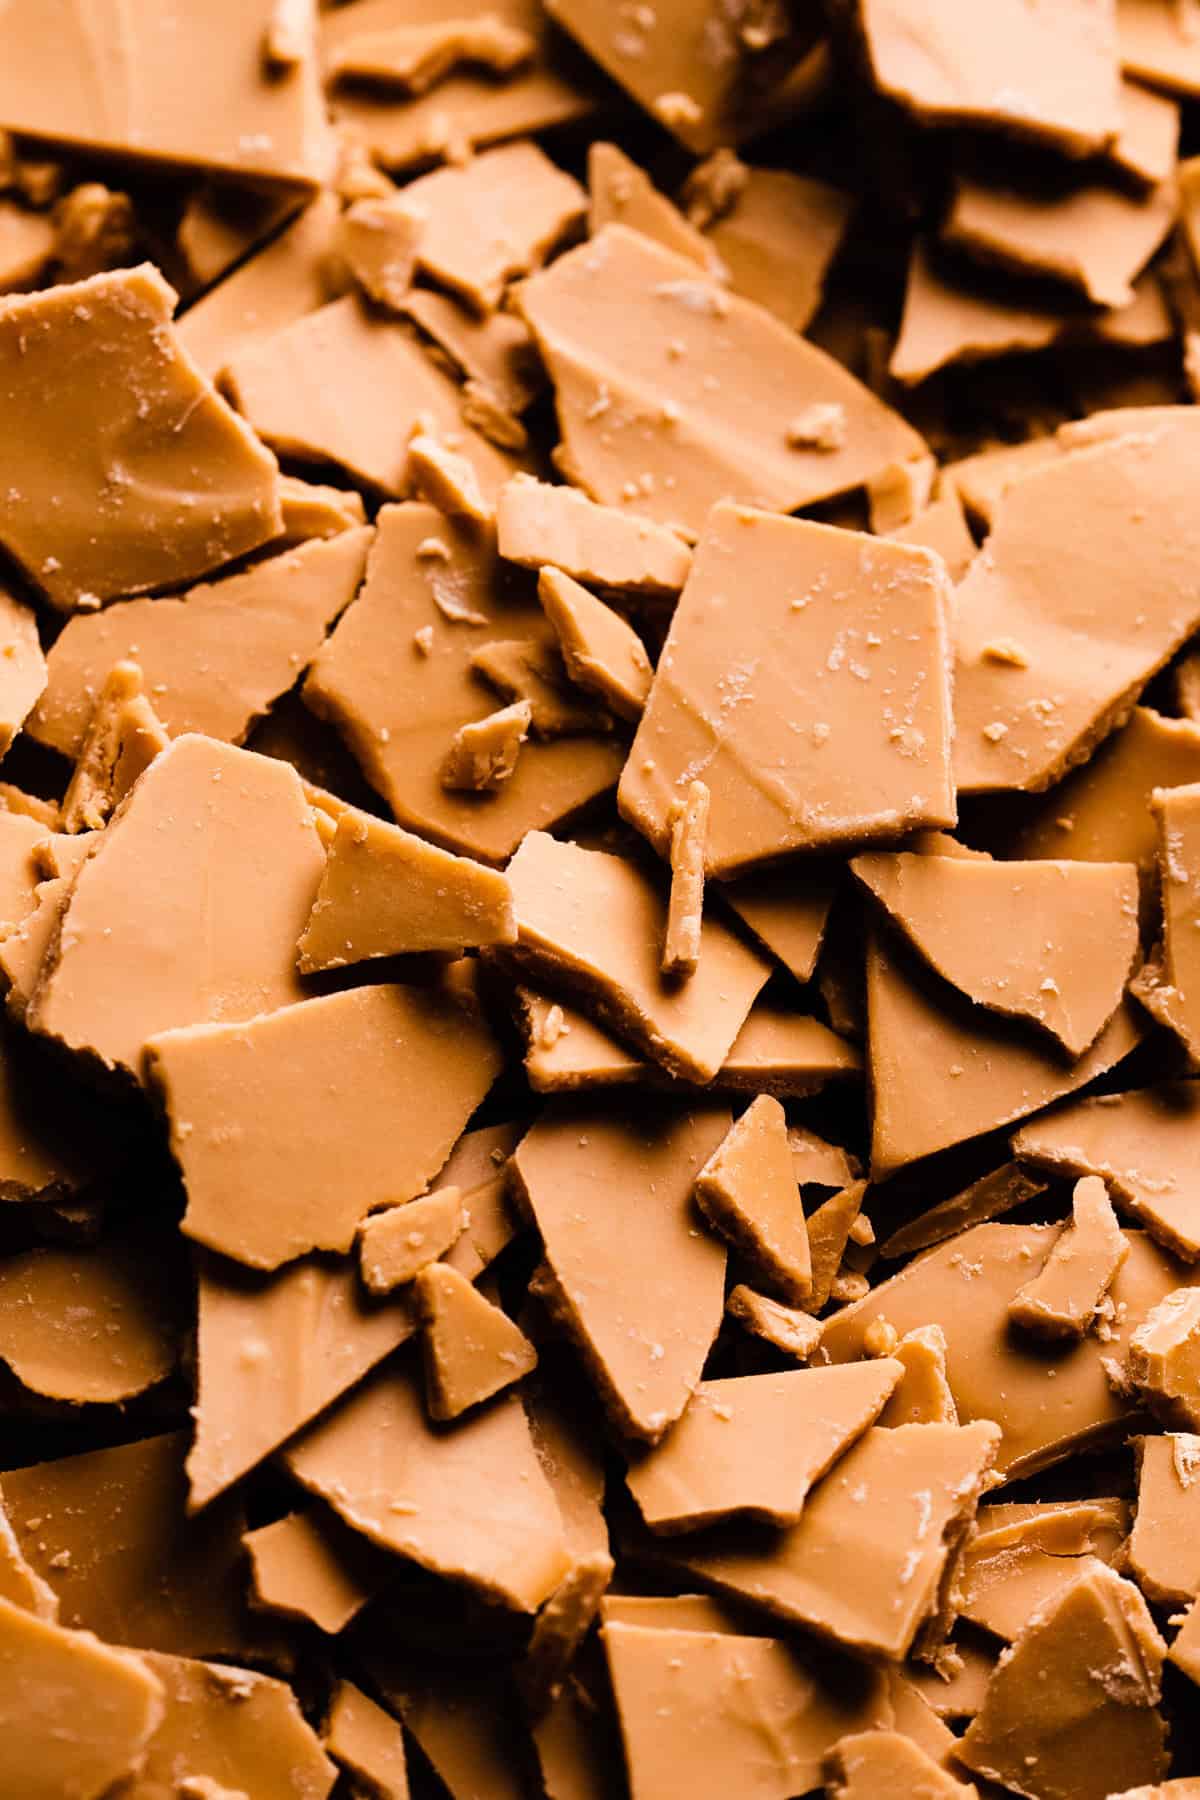 A close-up of chunks of caramelized white chocolate. The pieces are a deep caramely color.